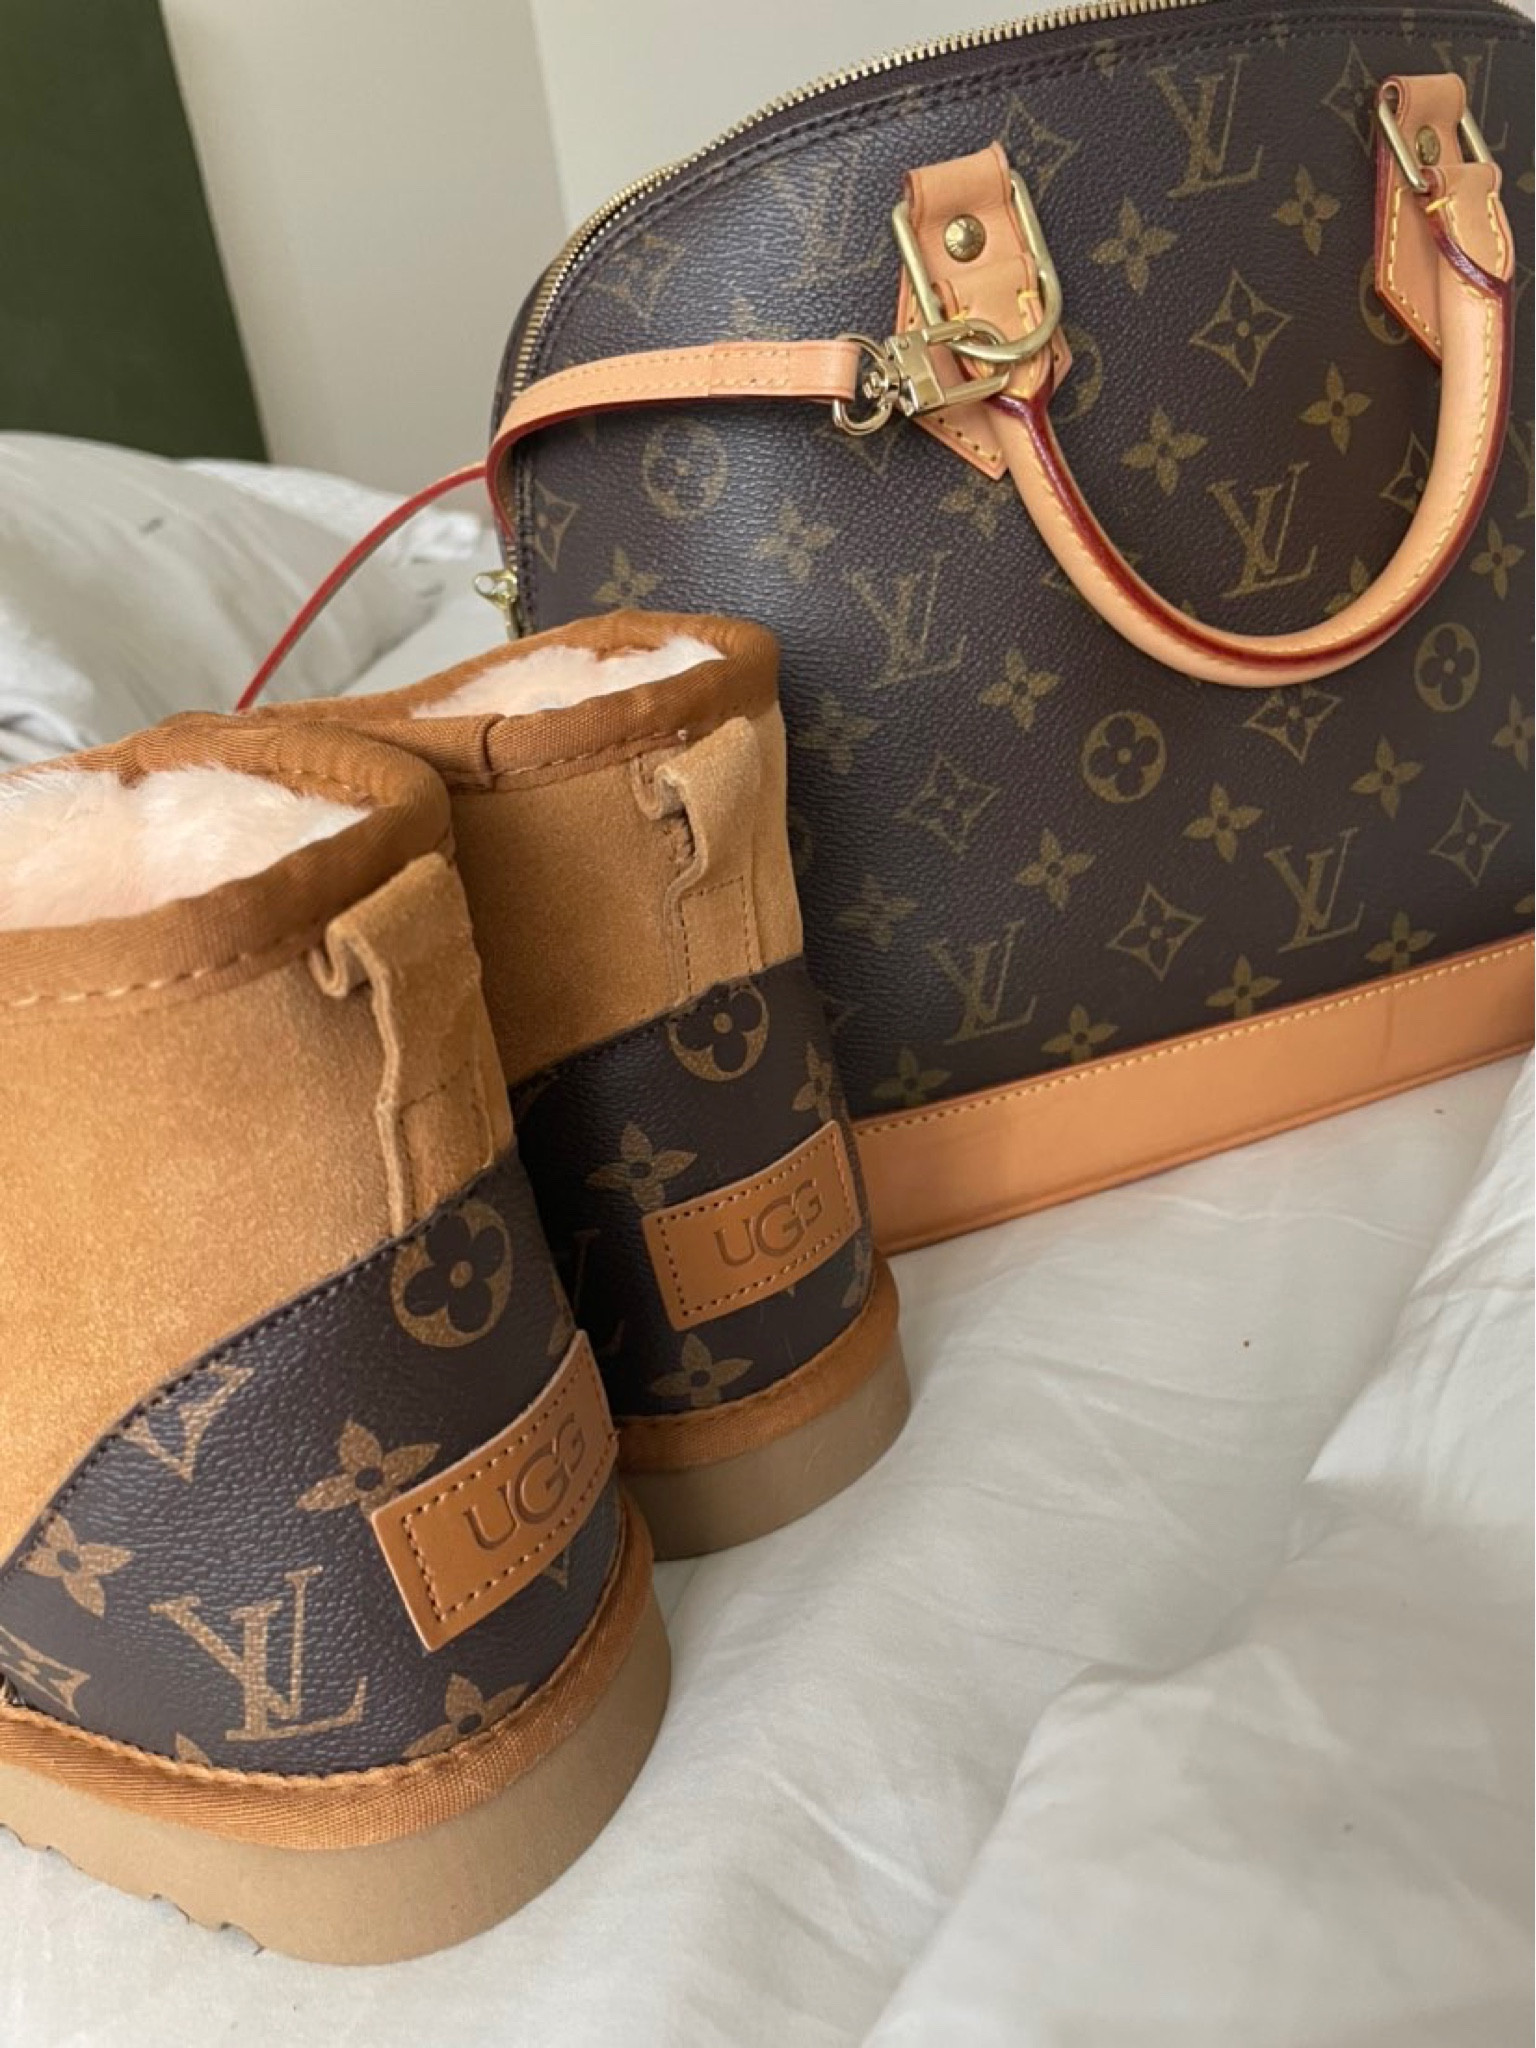 ugg, fashion, and shoes image  Fur boots, Louis vuitton handbags